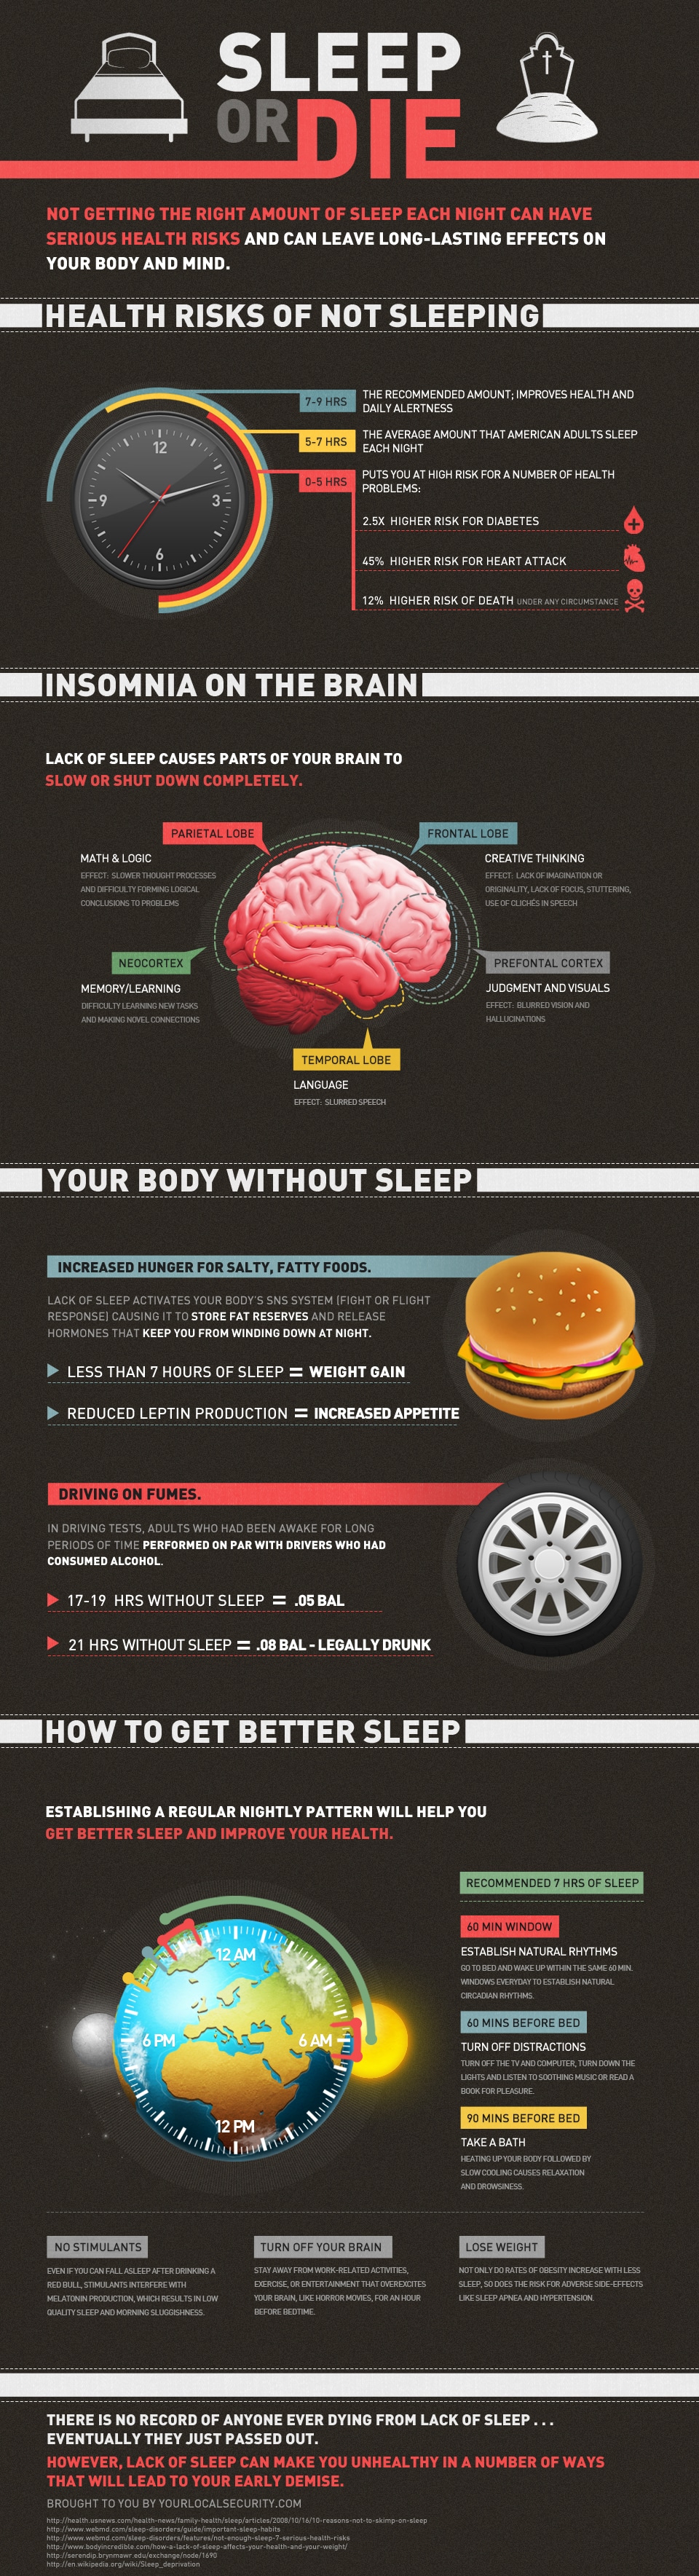 sleep-or-die-guide-infographic